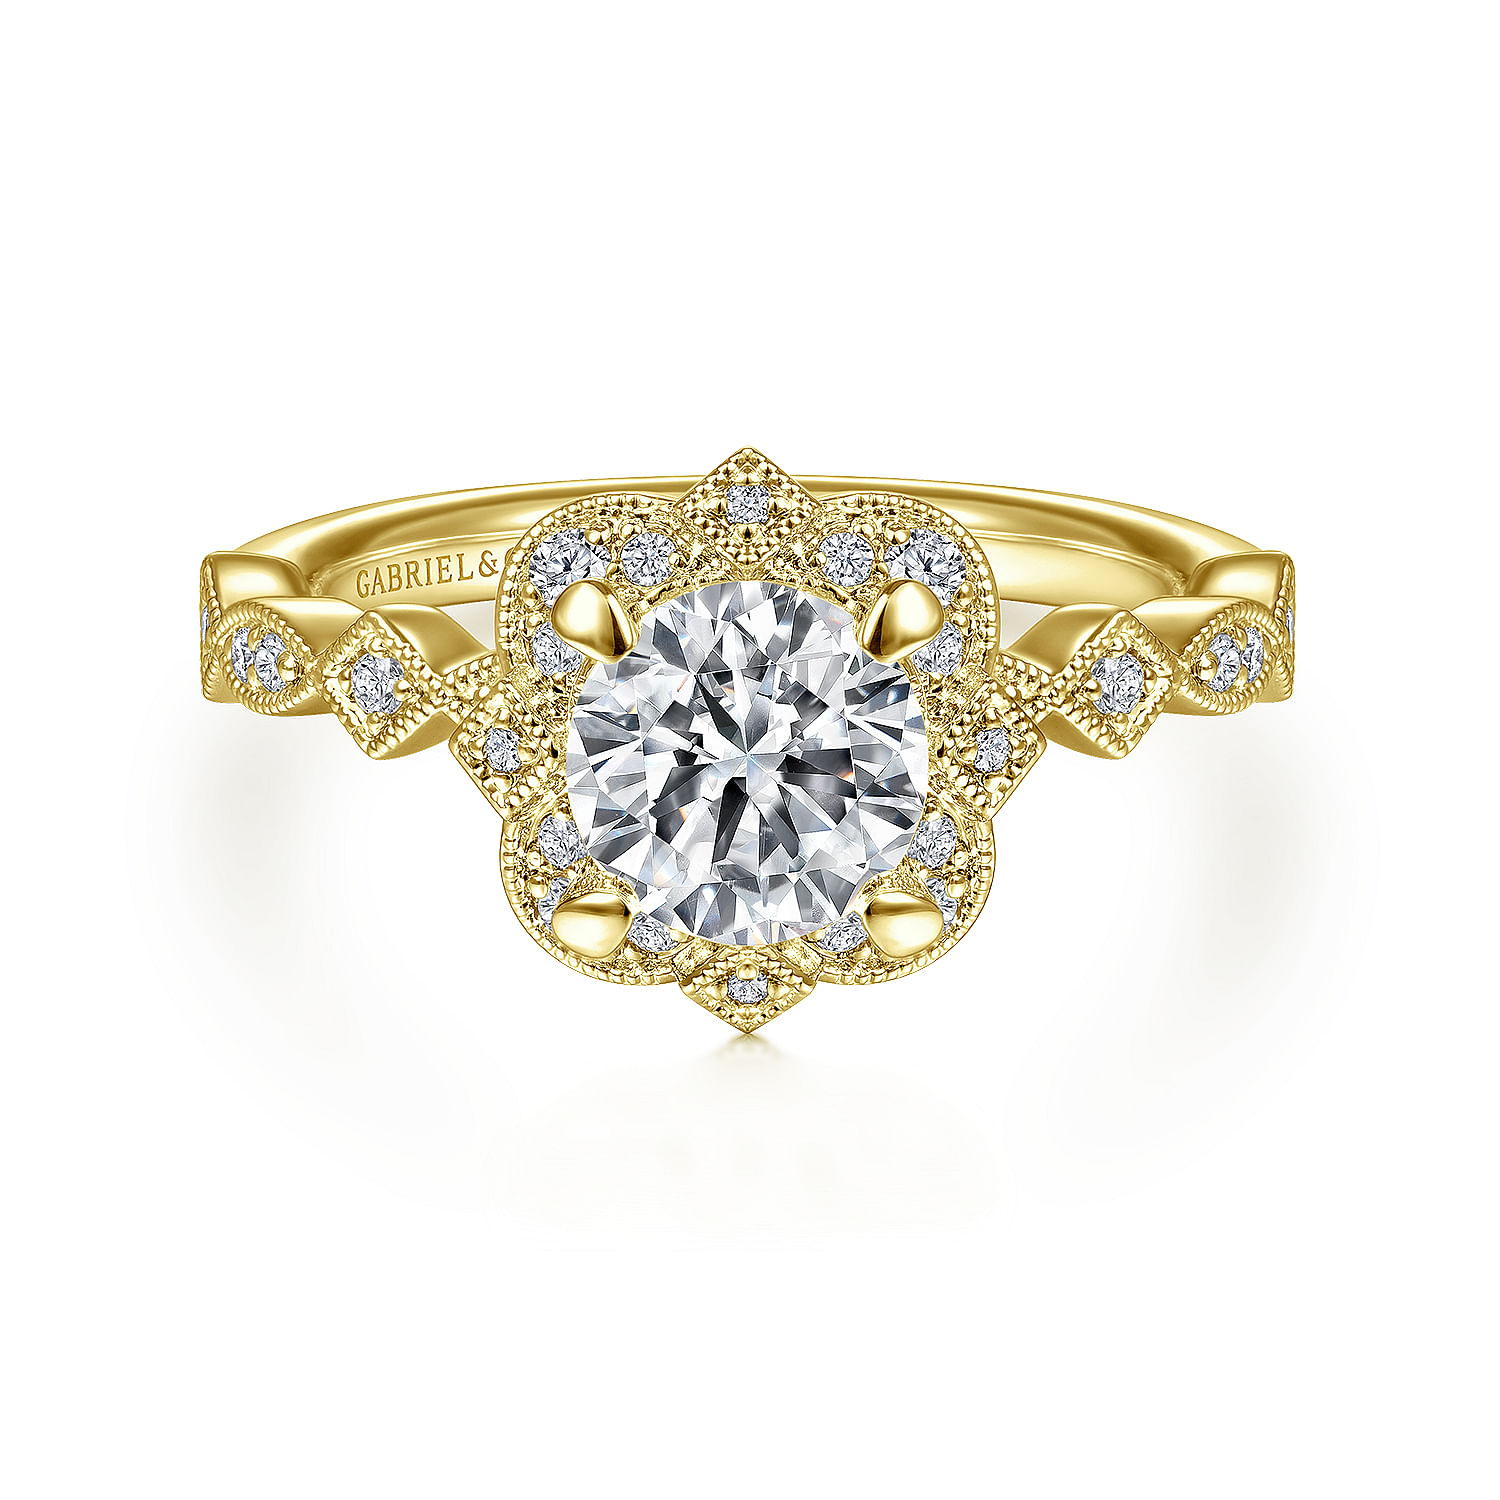 Gabriel - Vintage Inspired 14K Yellow Gold Fancy Halo Round Diamond Engagement Ring